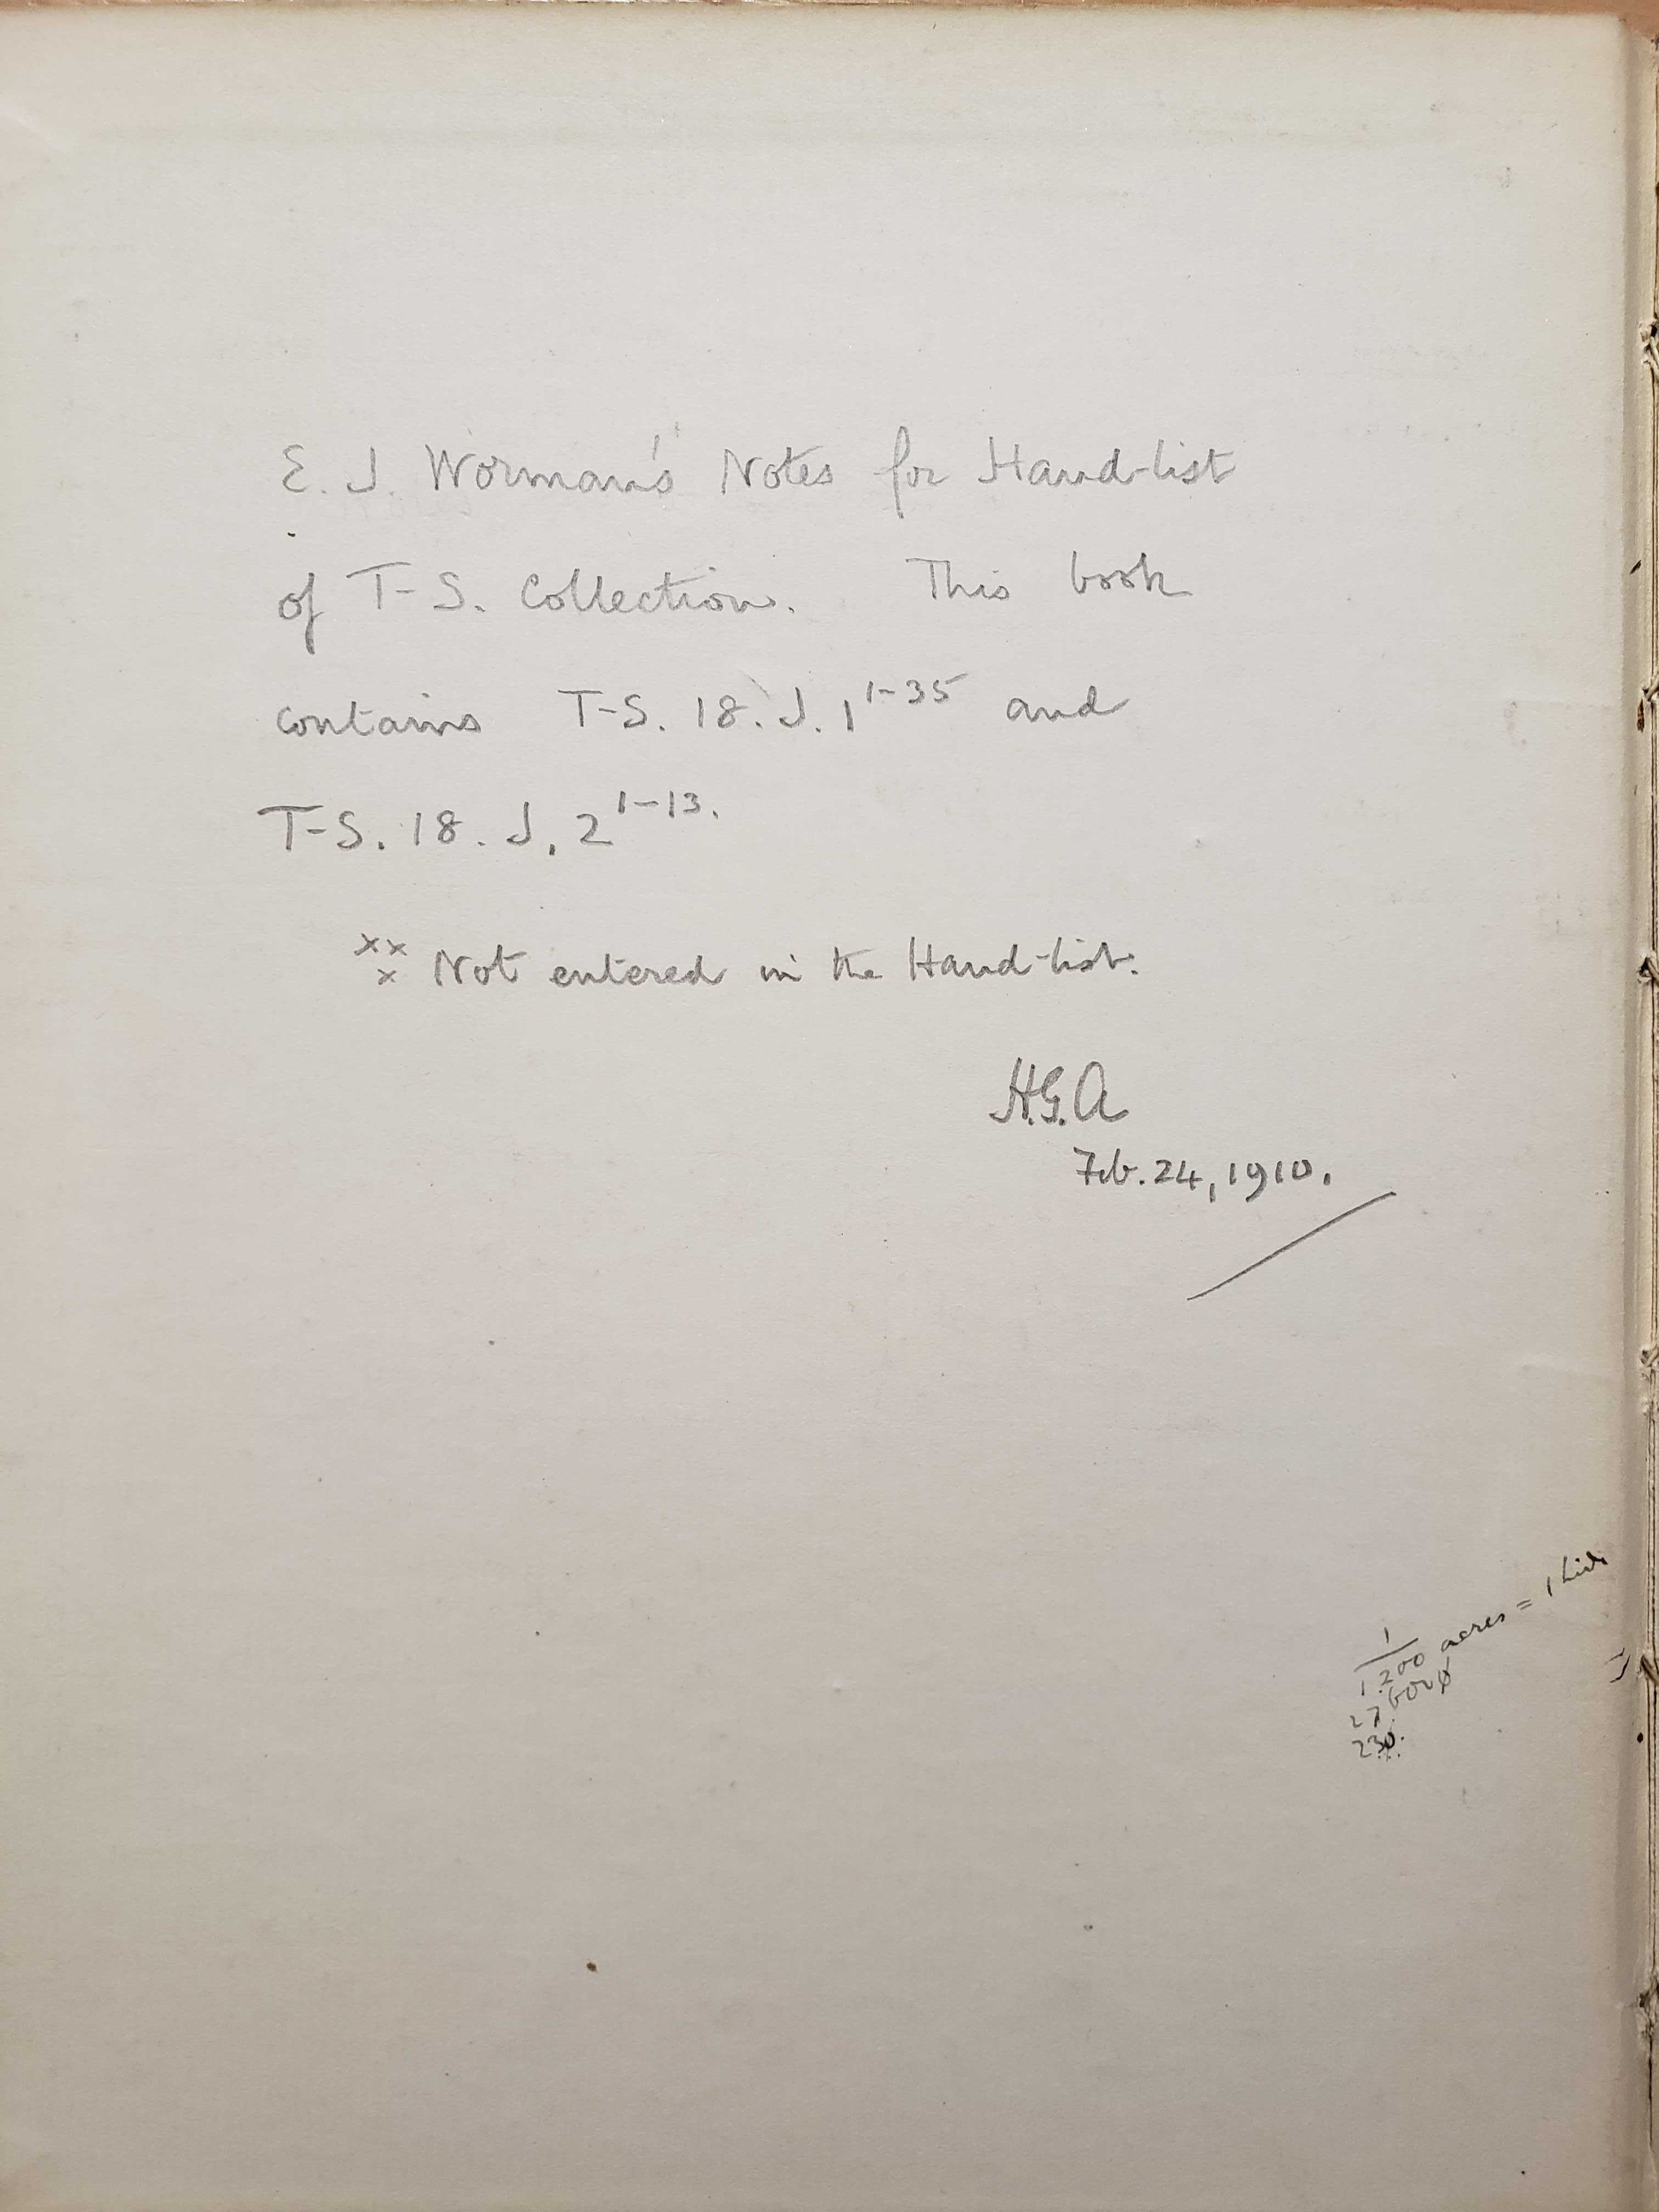 Posthumous inscription in Worman's notebook